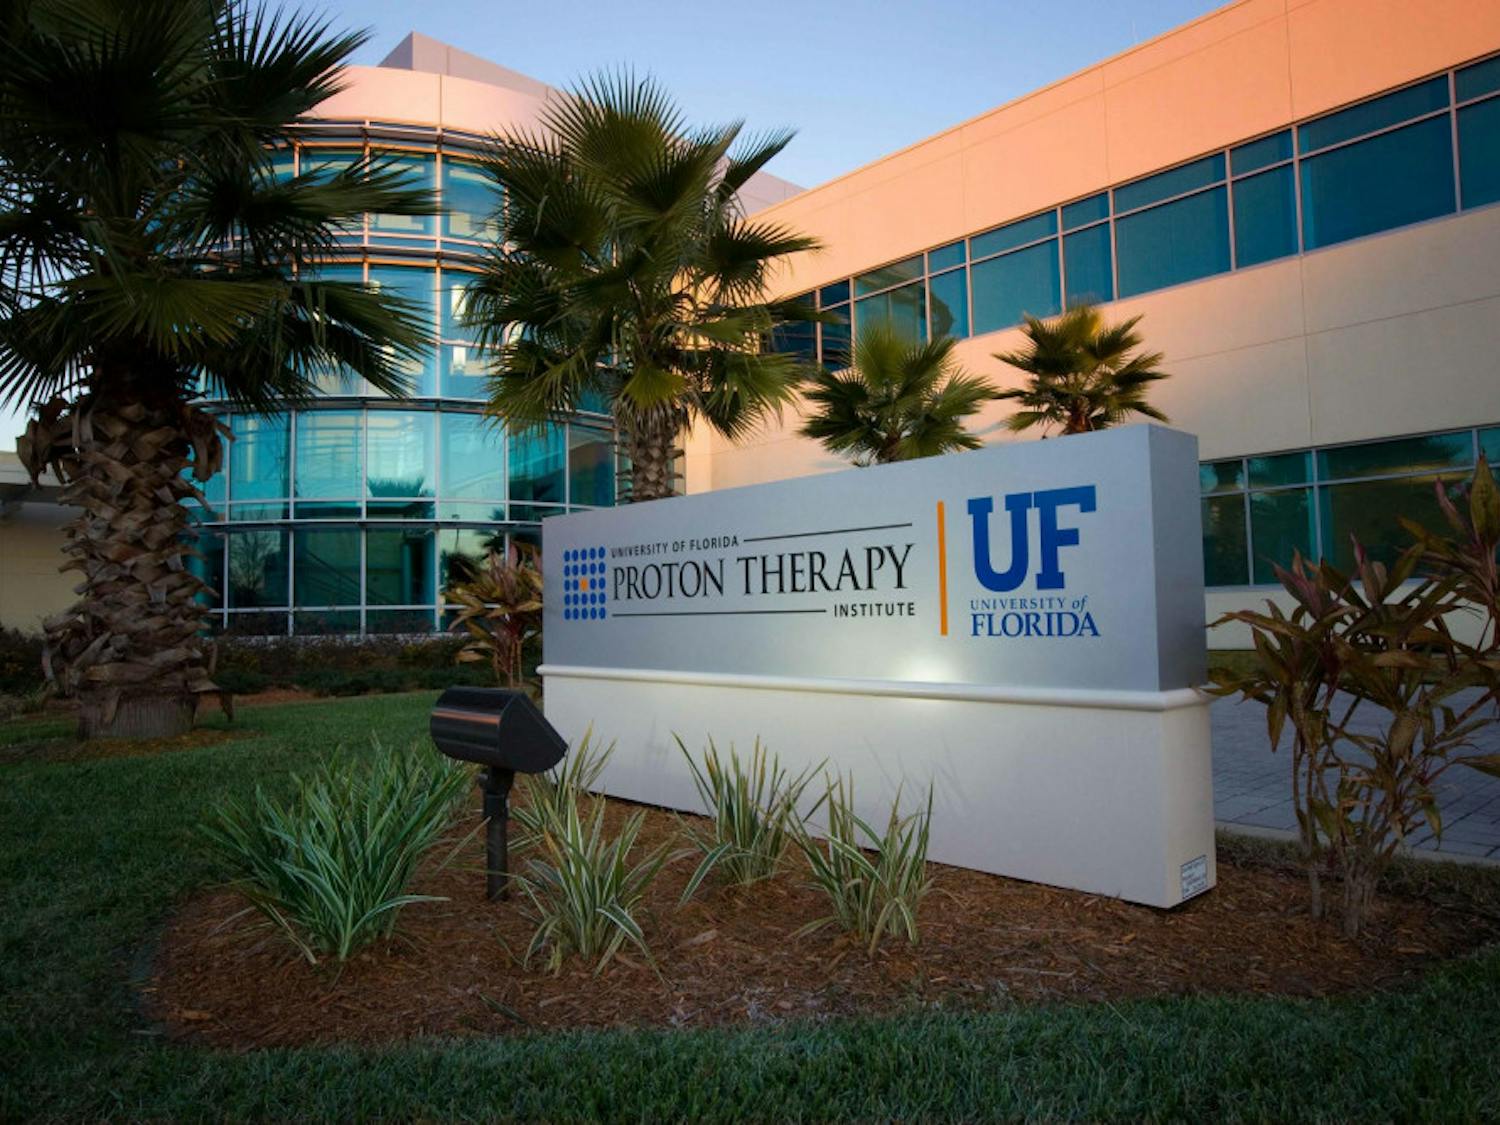 The UF Proton Therapy Institute in Jacksonville, Florida, received $11.5 million in research funds for its experimental prostate cancer treatment. 